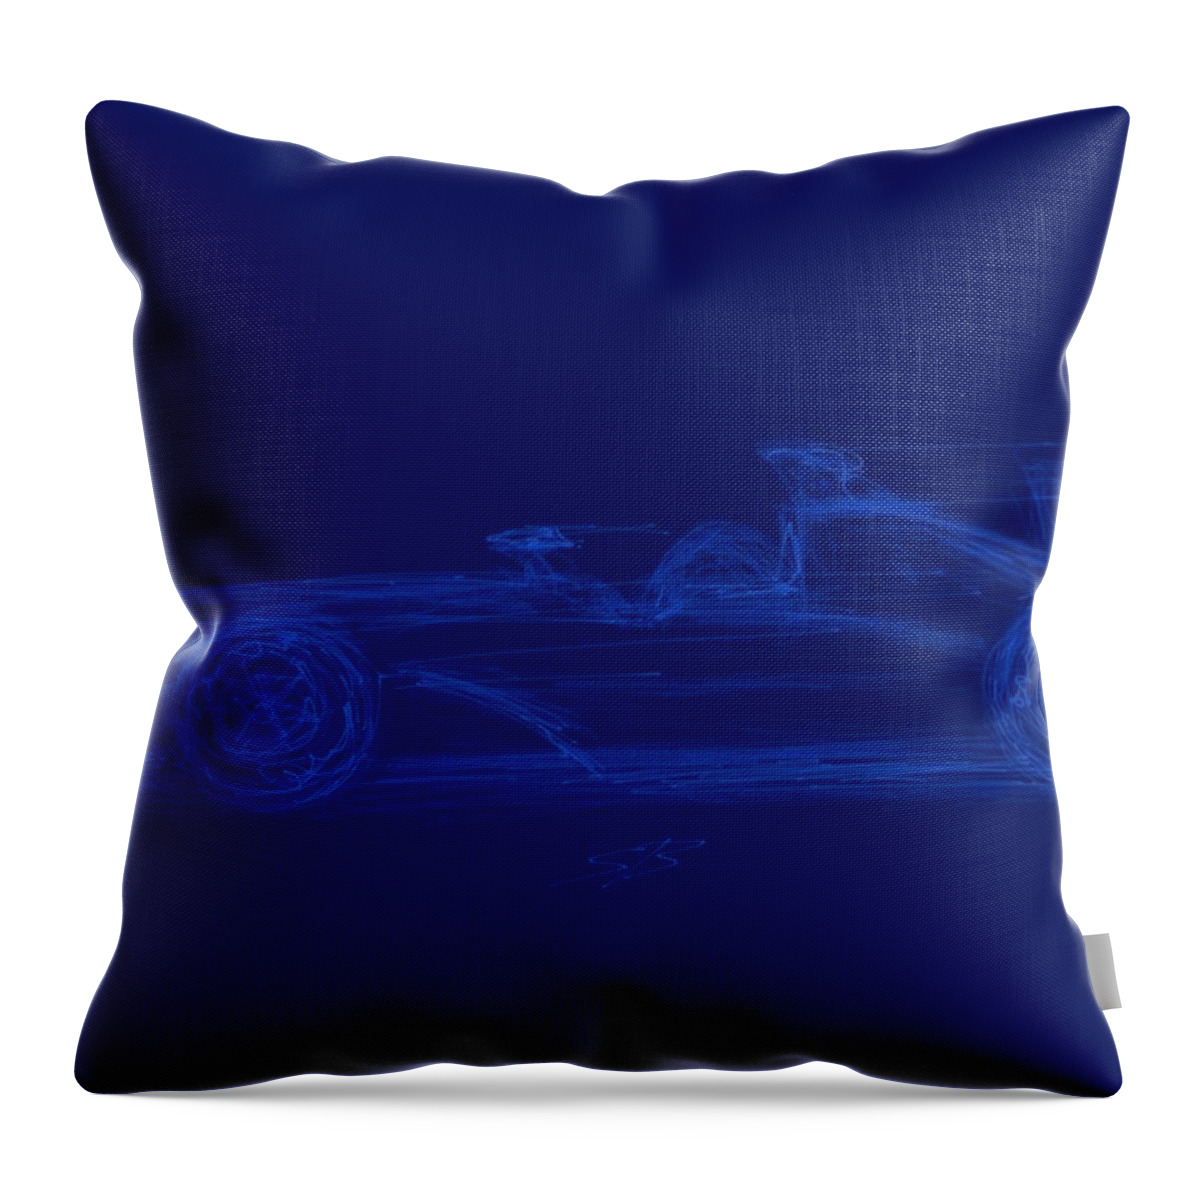 Racing Throw Pillow featuring the digital art Blueprint for Speed by Stacy C Bottoms